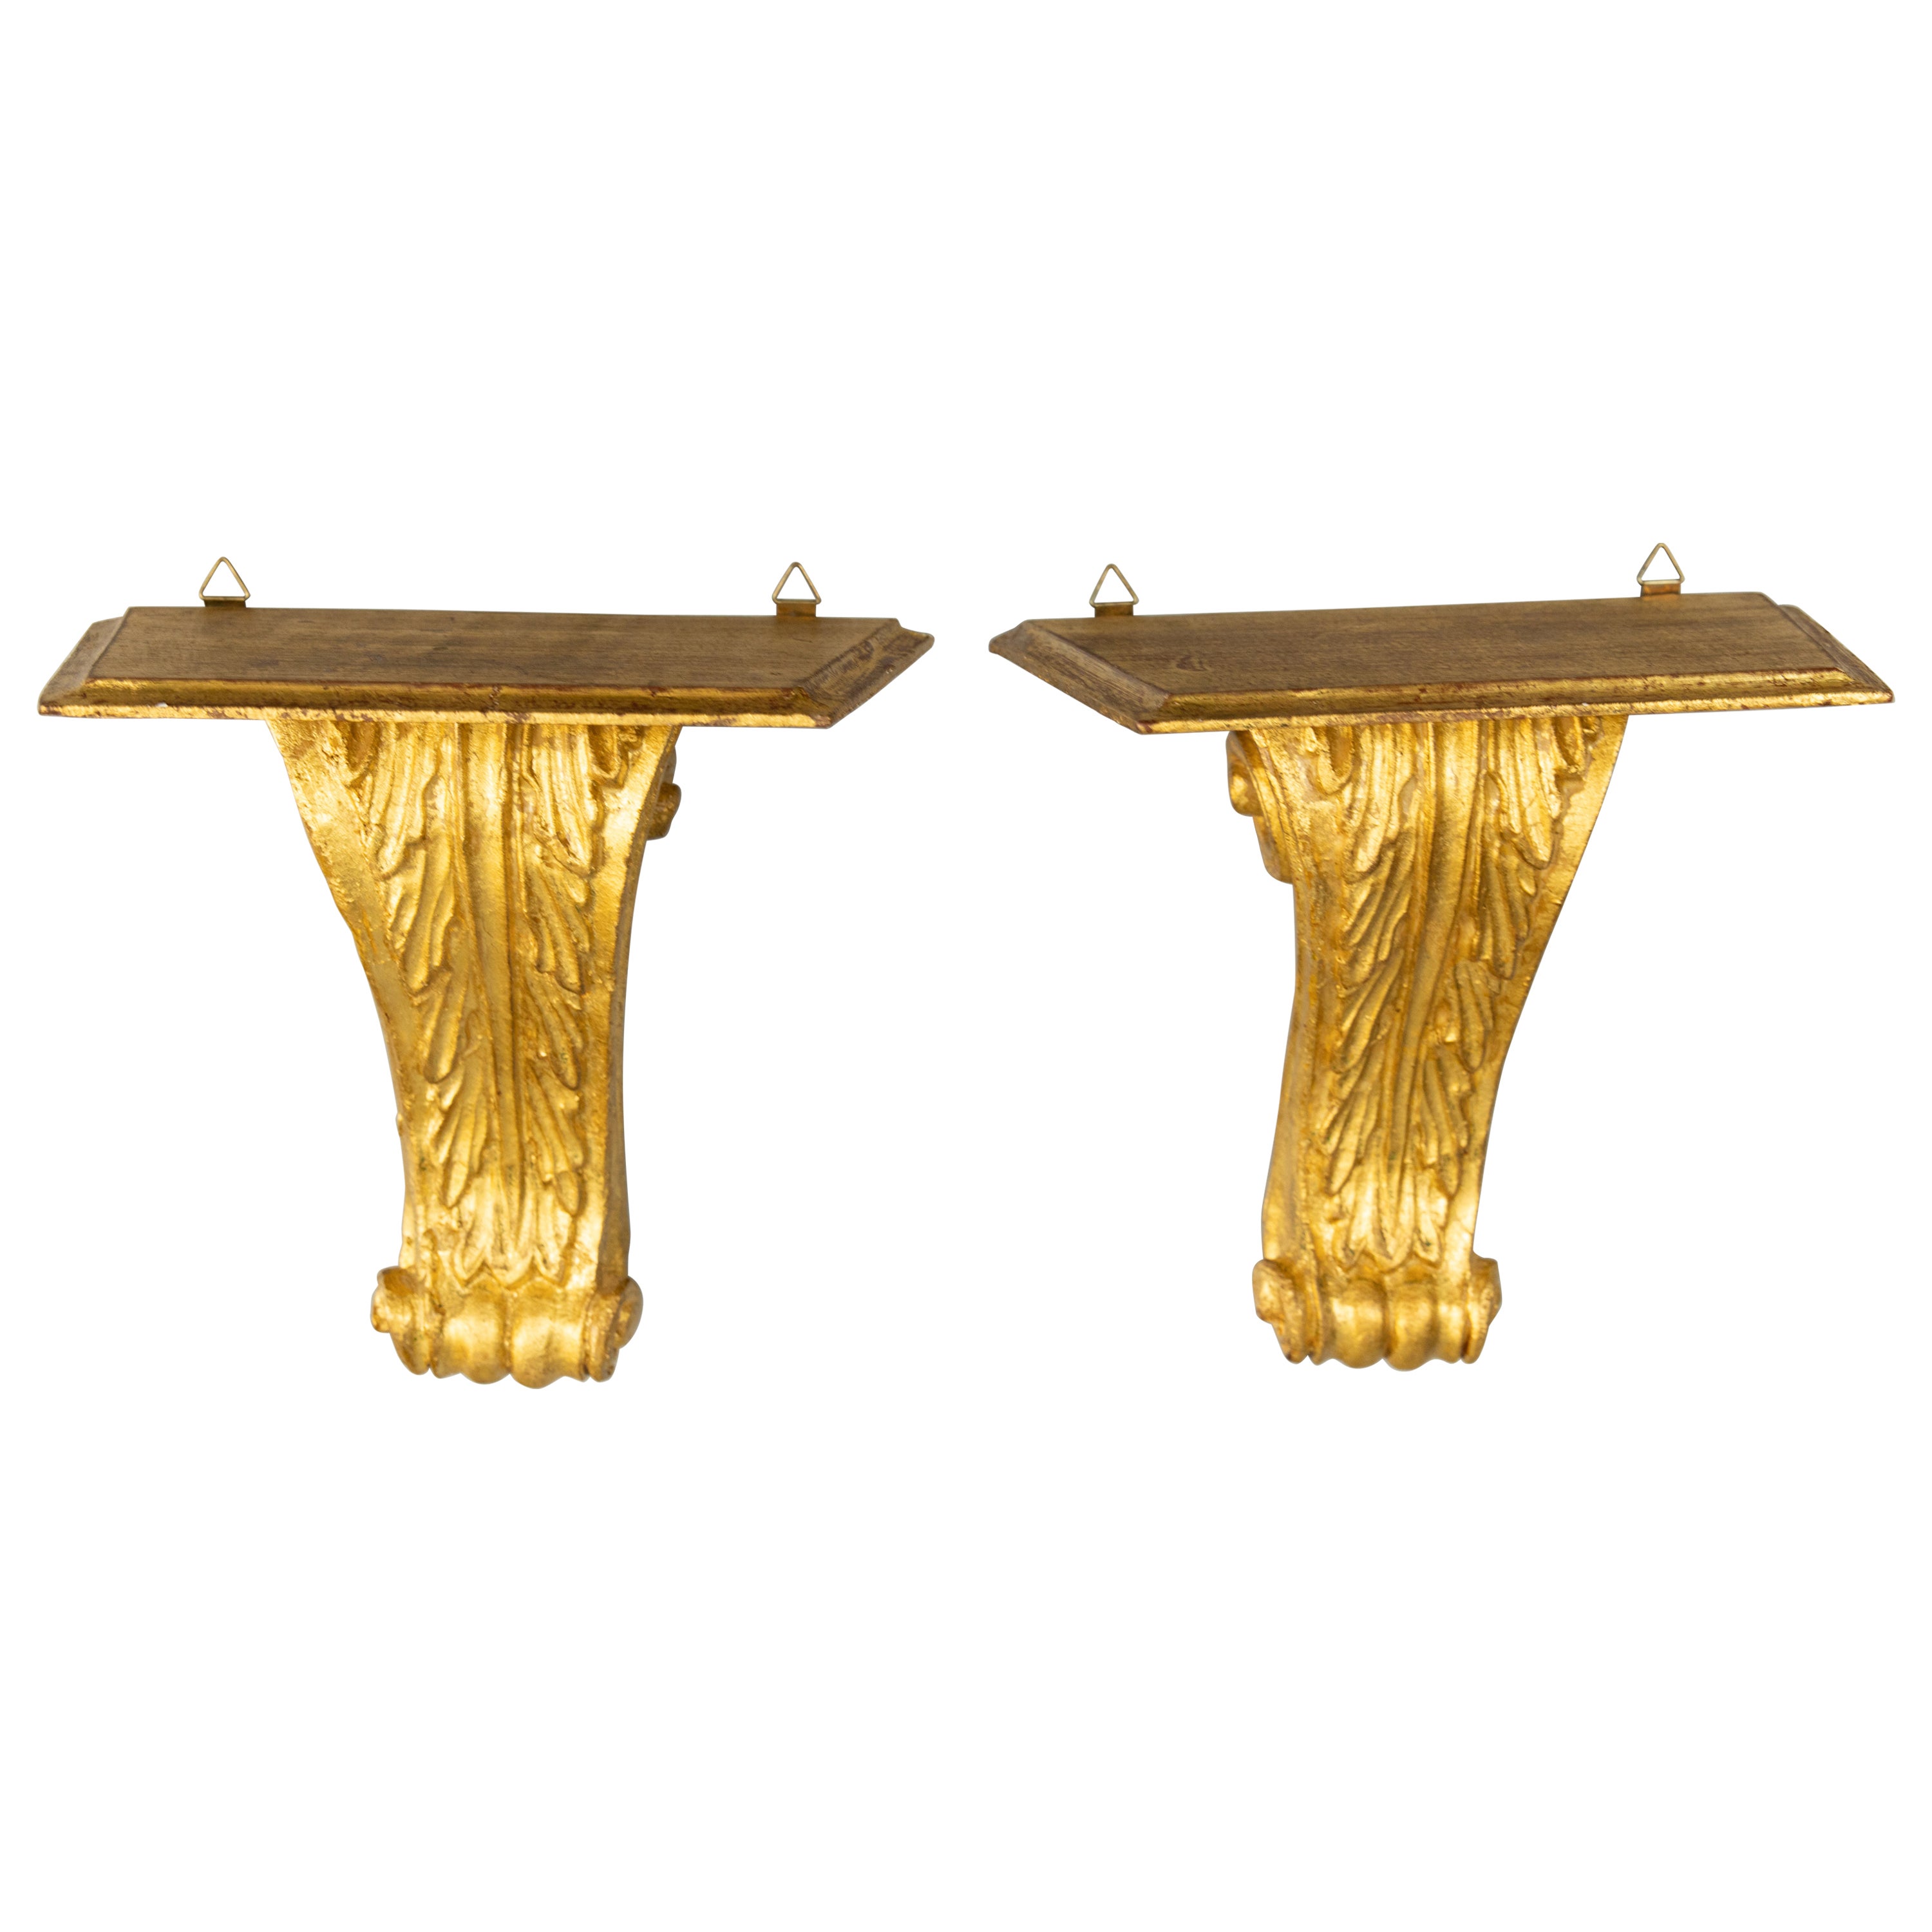 Pair of Mid-20th Century Italian Carved Giltwood Wall Brackets Shelves